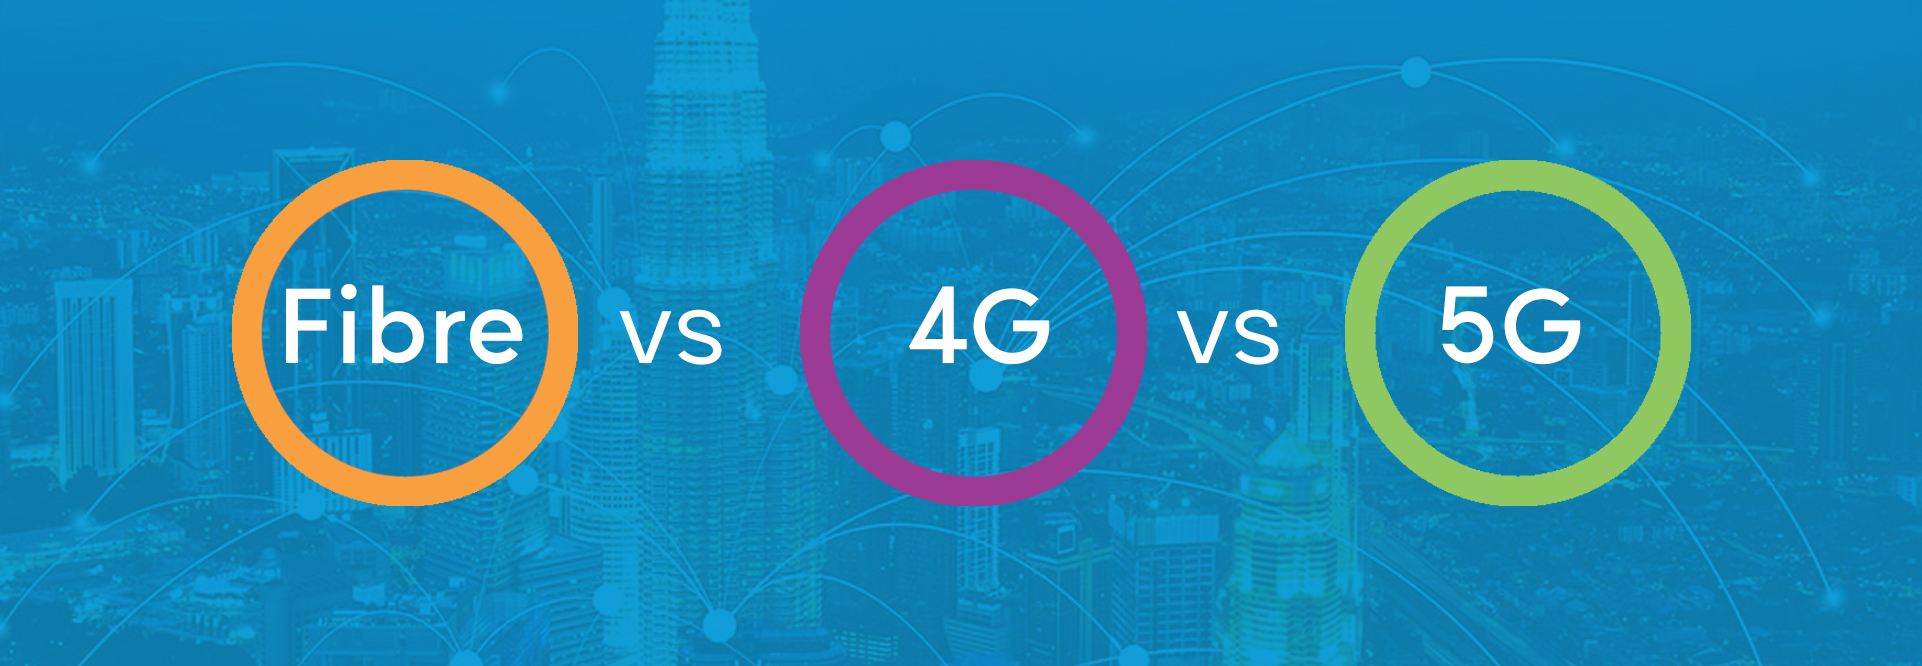 Fibre vs 4G vs 5G, what's the difference?